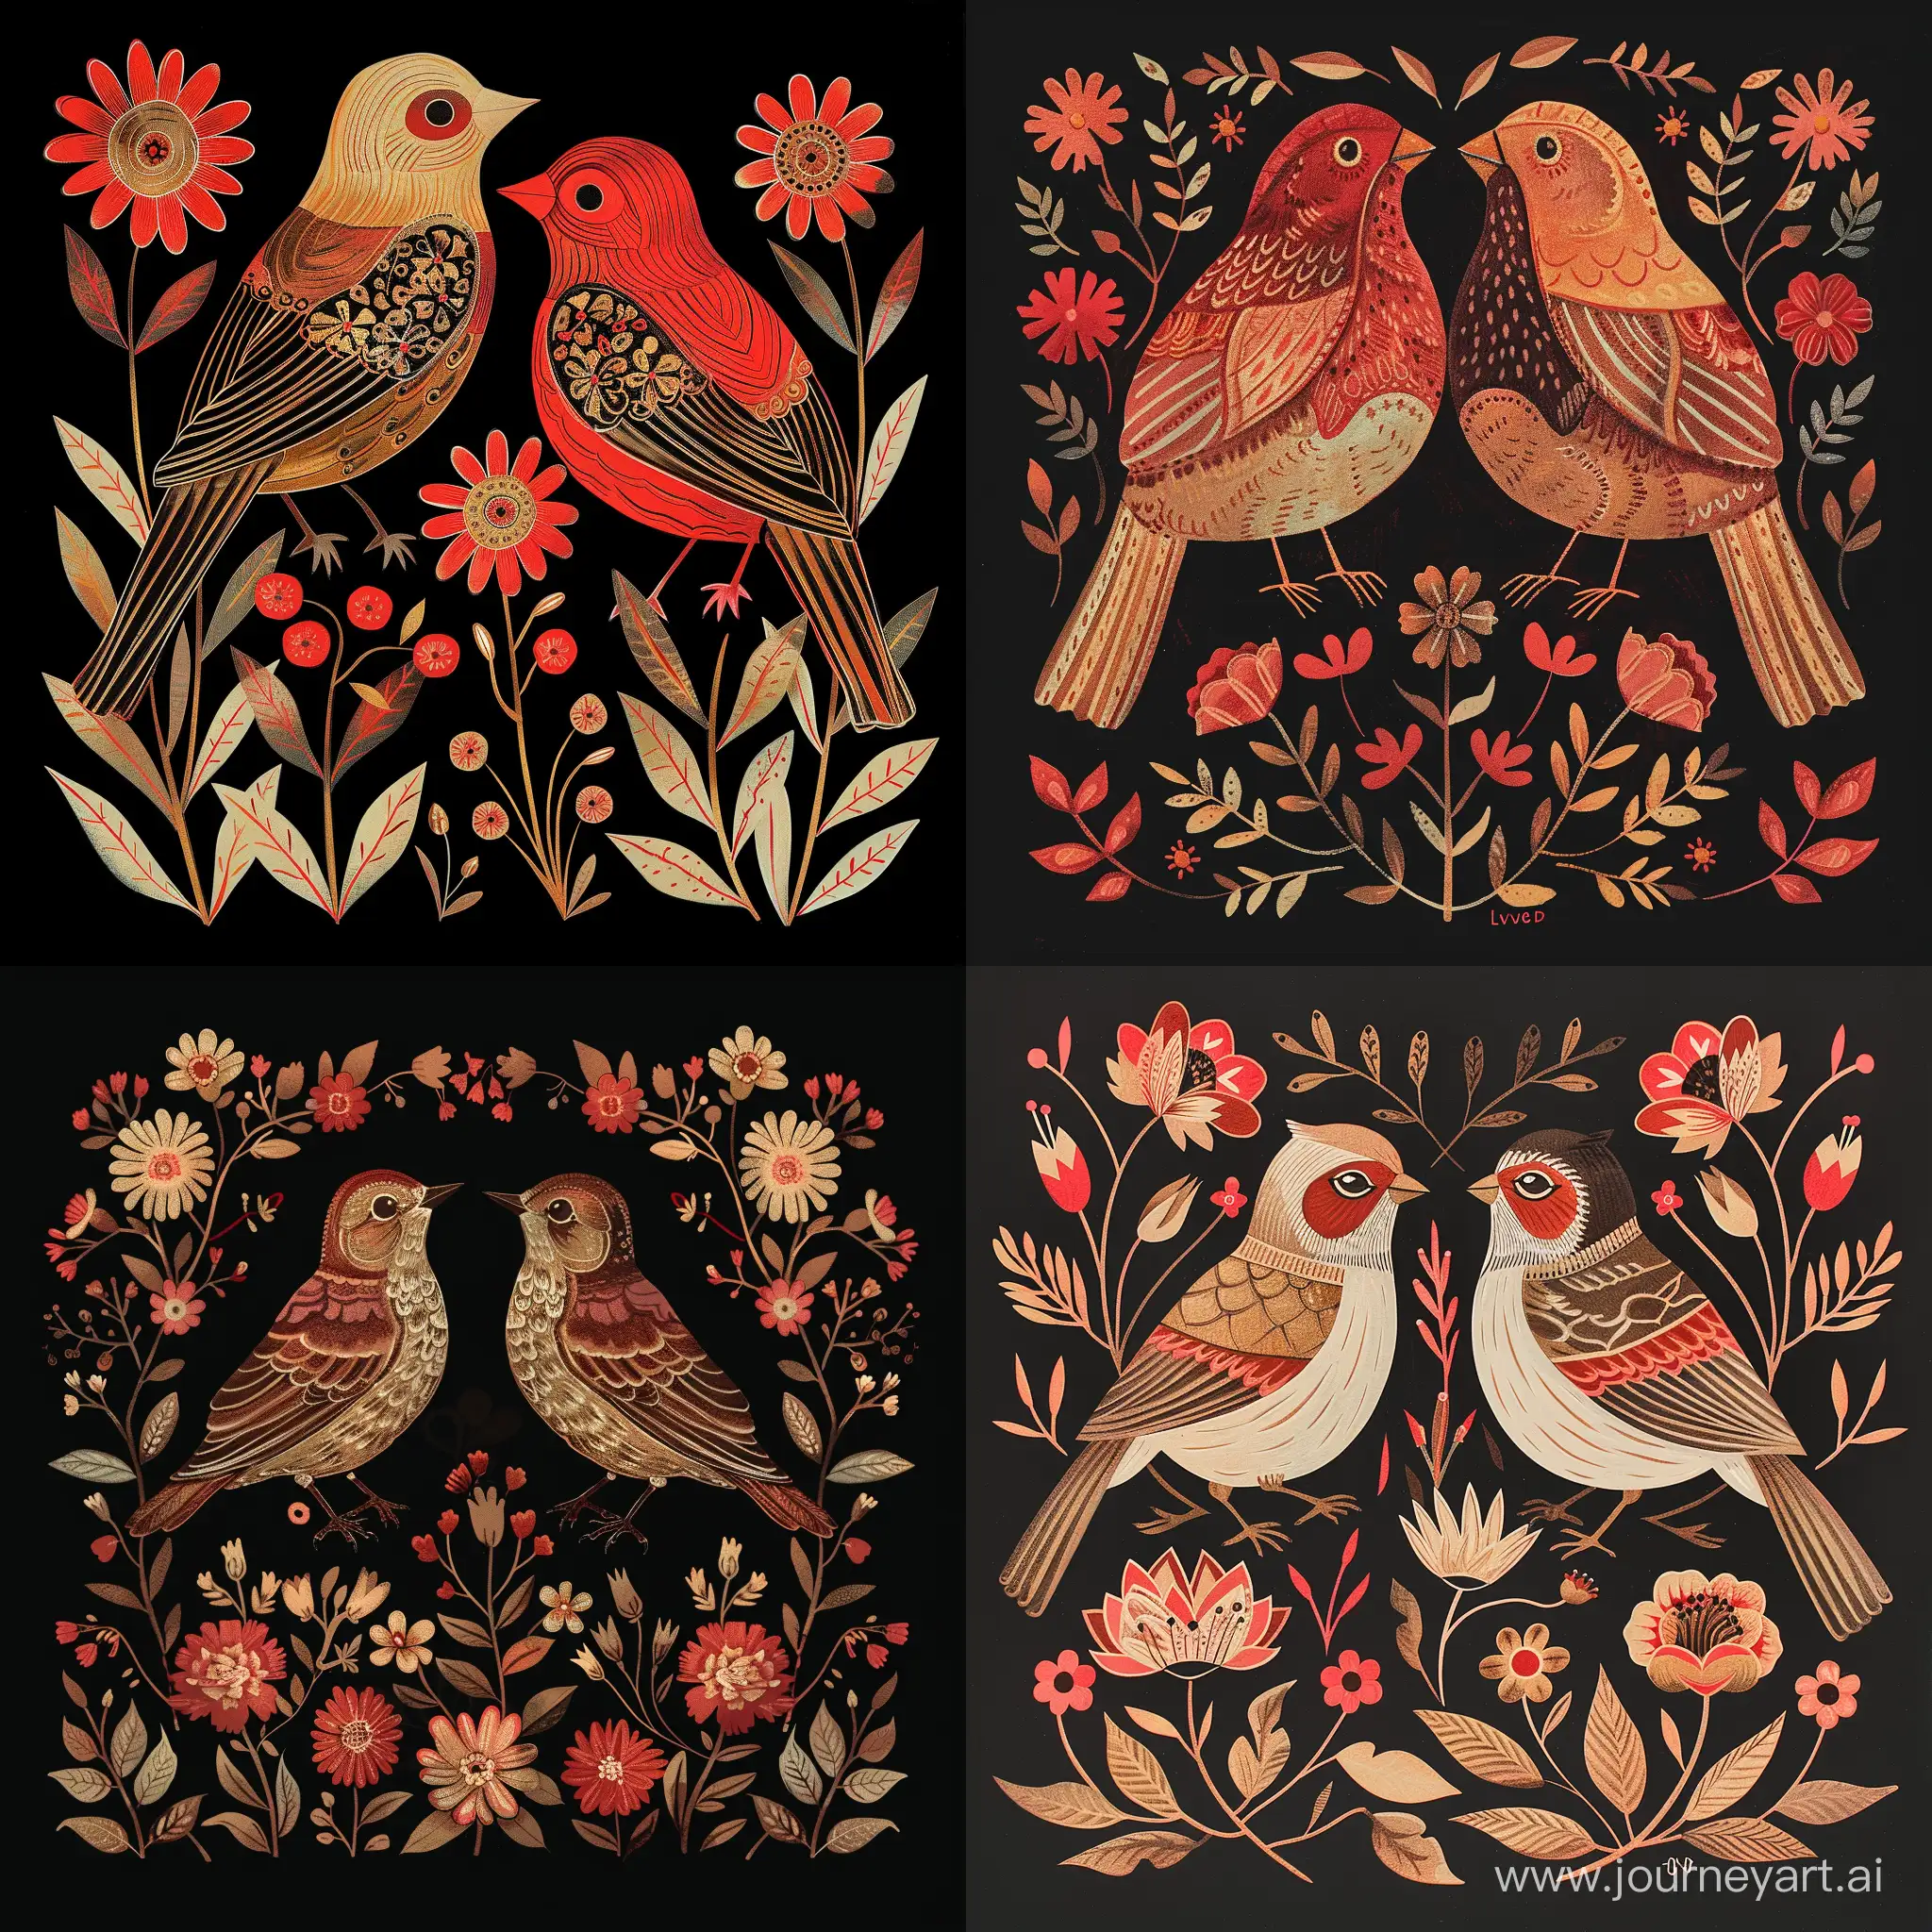 two birds sitting in a garden with flowers on black, in the style of folk art-inspired illustrations, light red and dark amber, editorial illustrations, velvia, folkloric, high-contrast shading, wood
